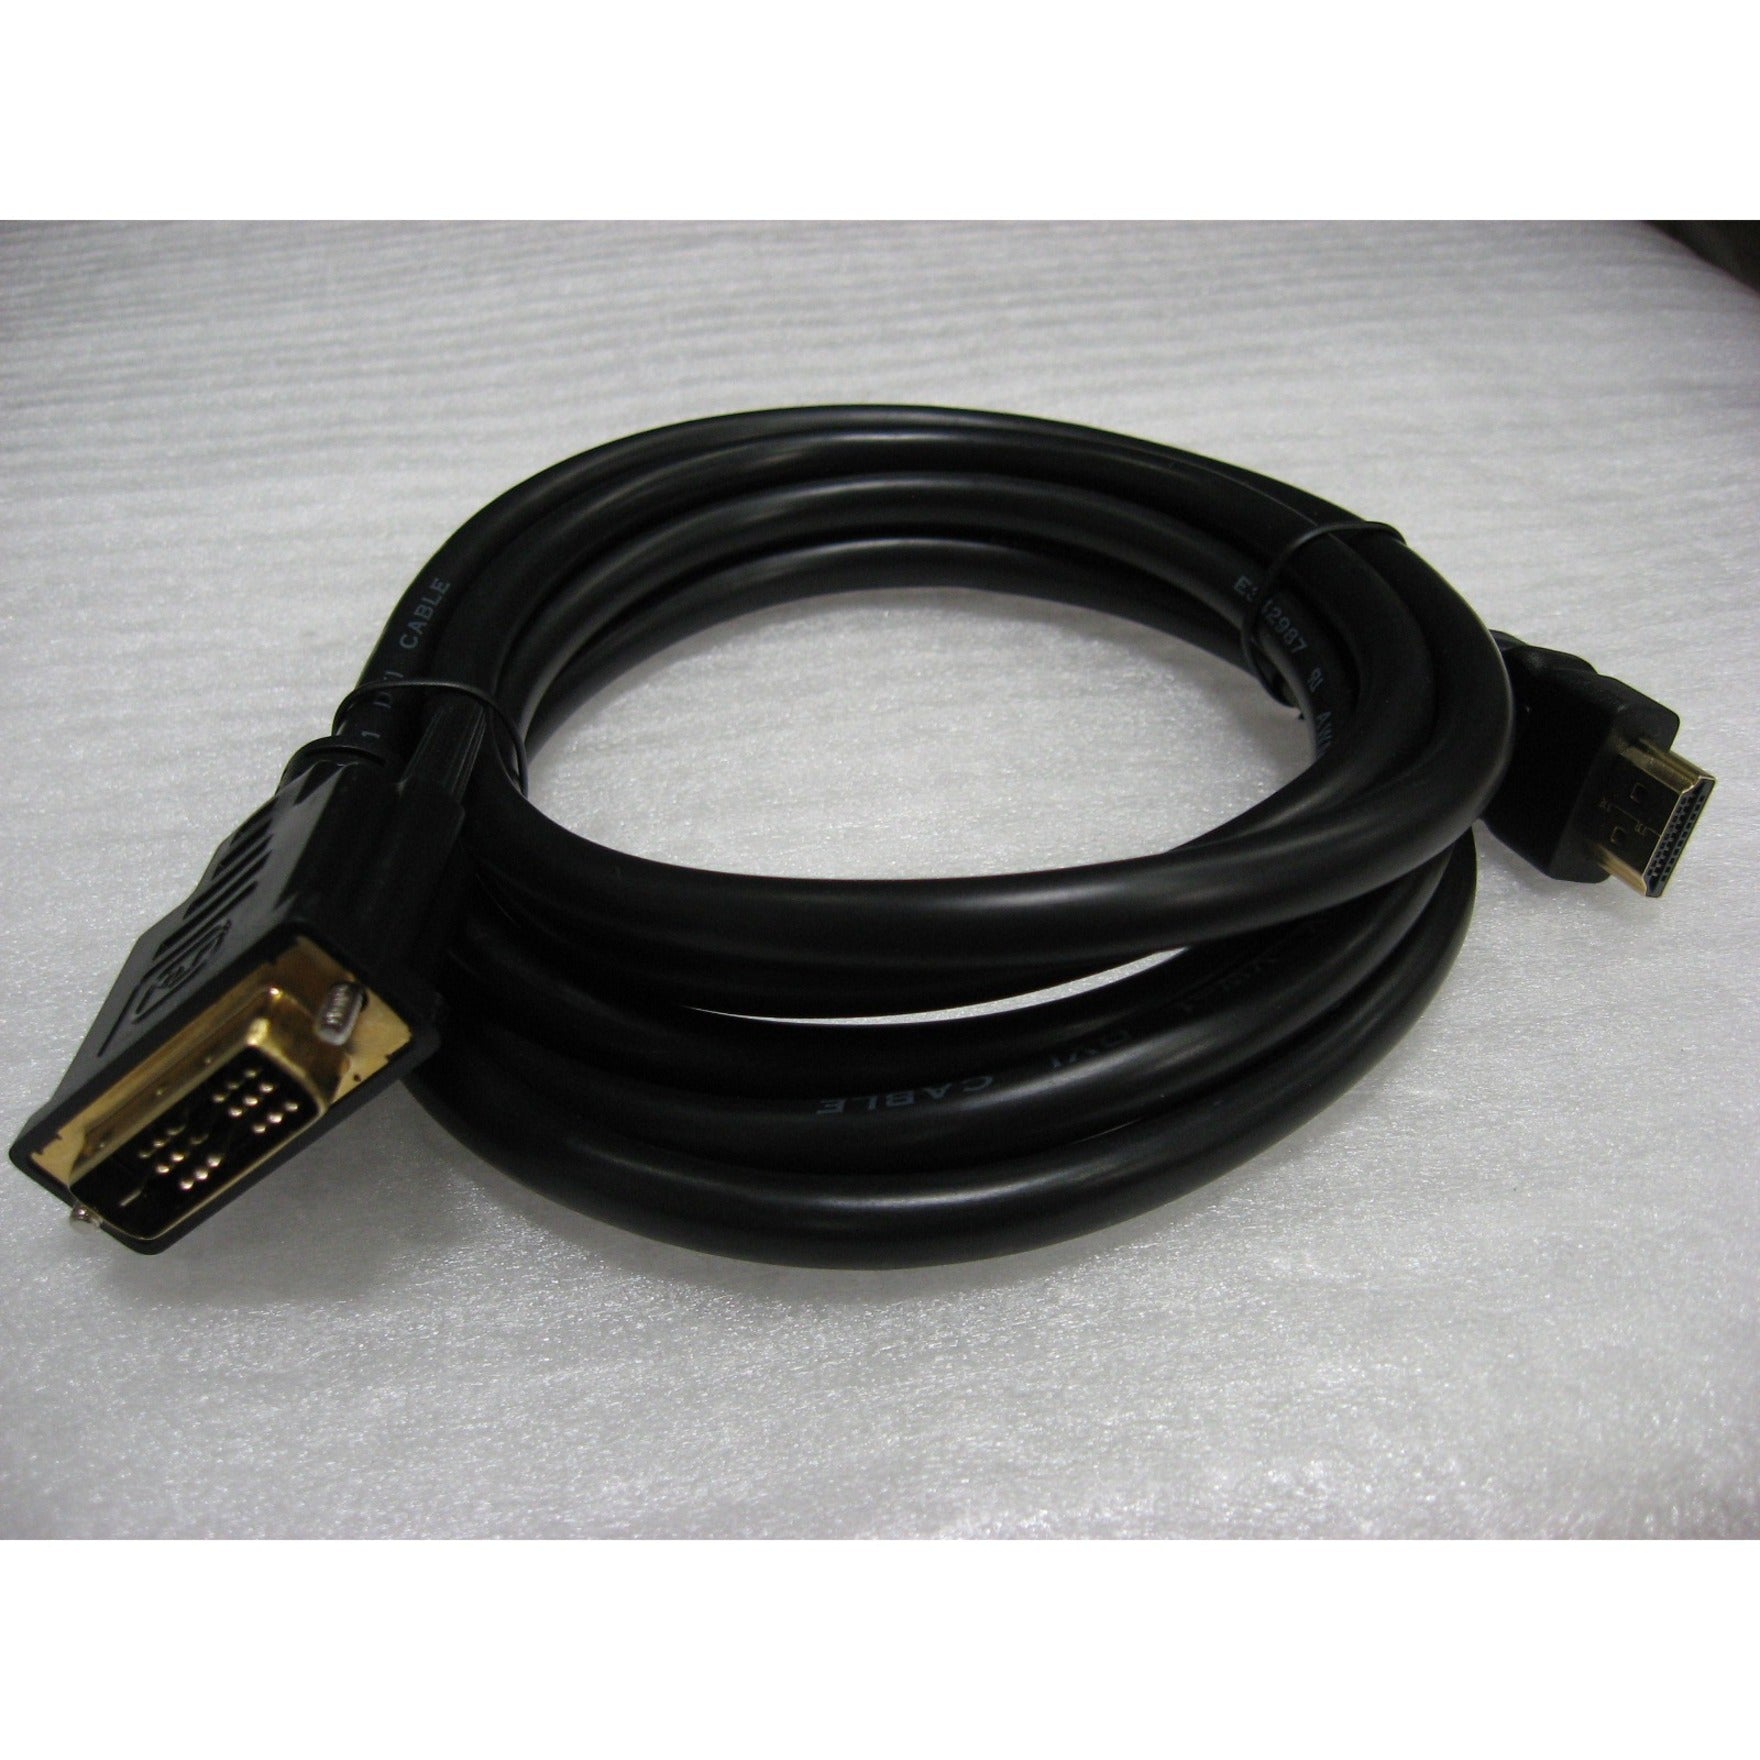 ViewSonic CB-00008948 Cable HDMI To DVI 1.8M(GLET), High-Quality Video Connection for Monitors and Video Devices